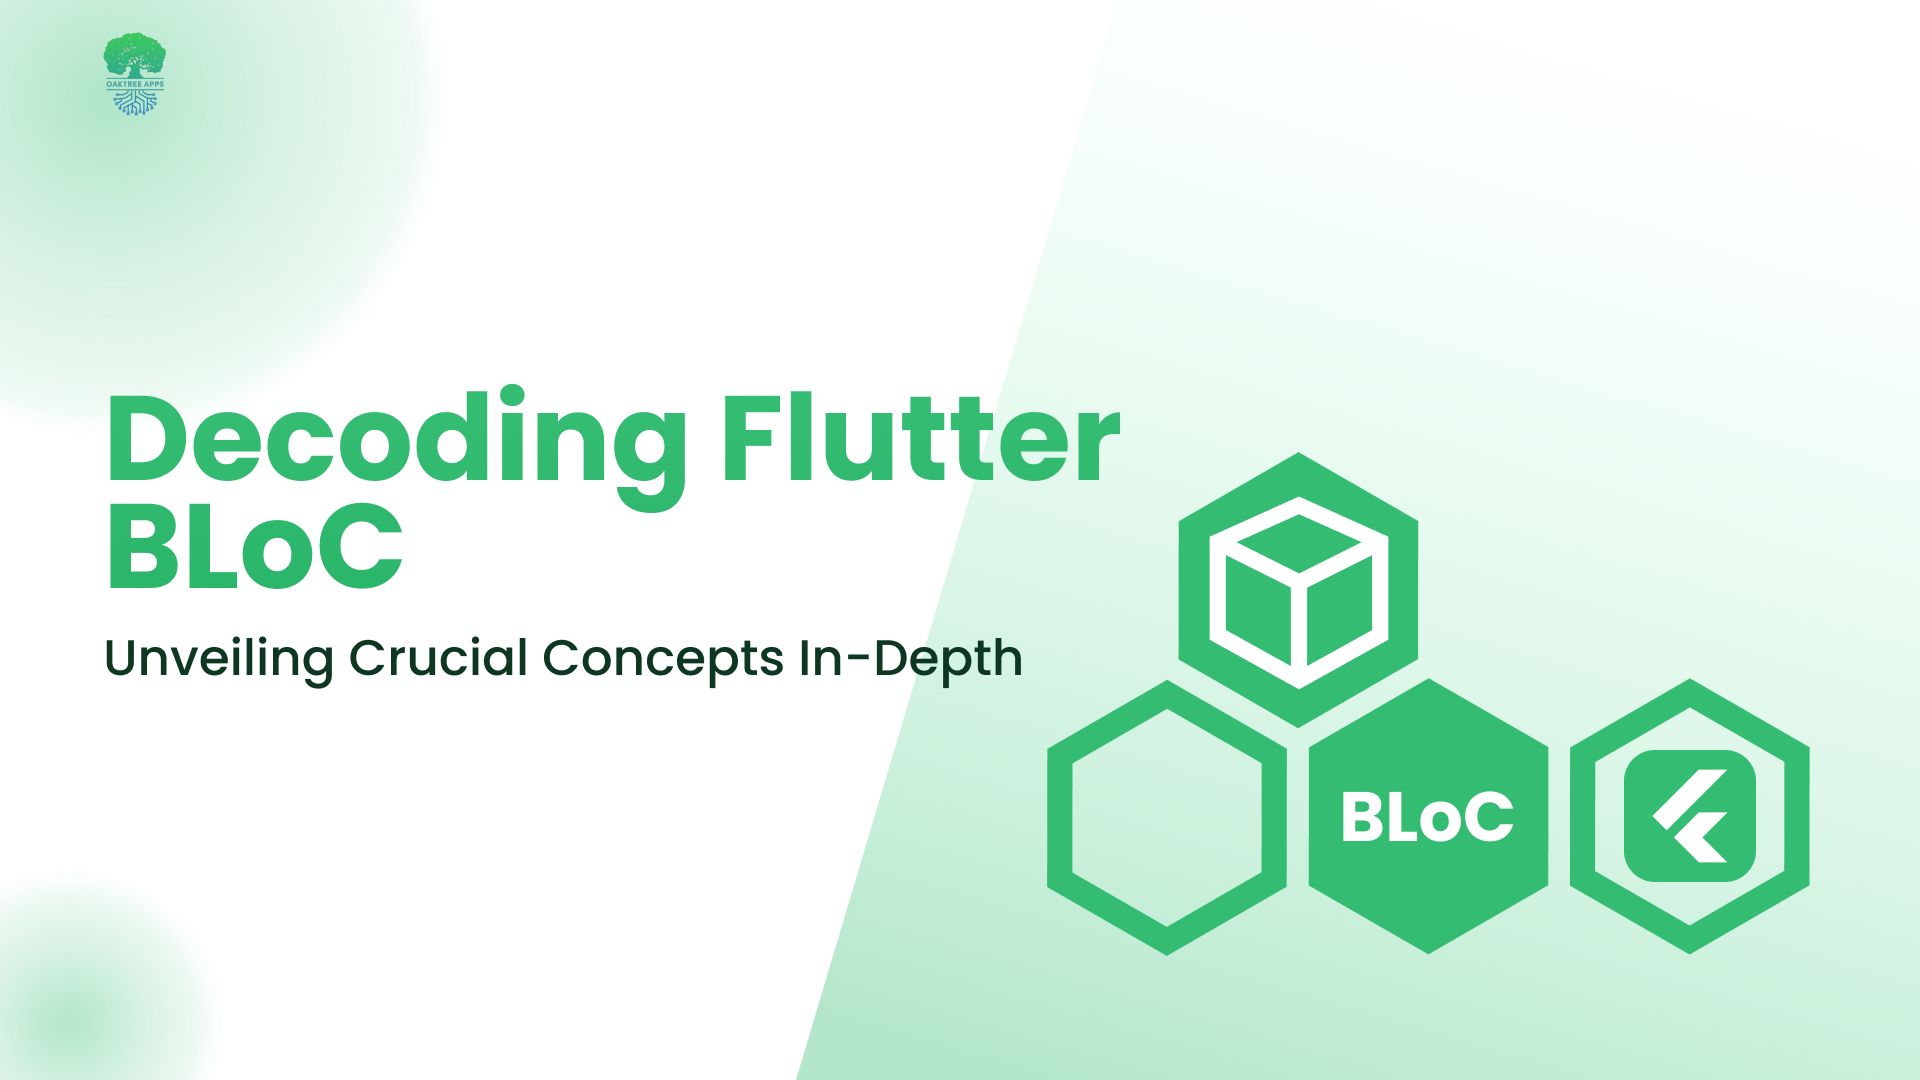 Decoding_Flutter_BLoC_Unveiling_Crucial_Concepts_In-Dept.png